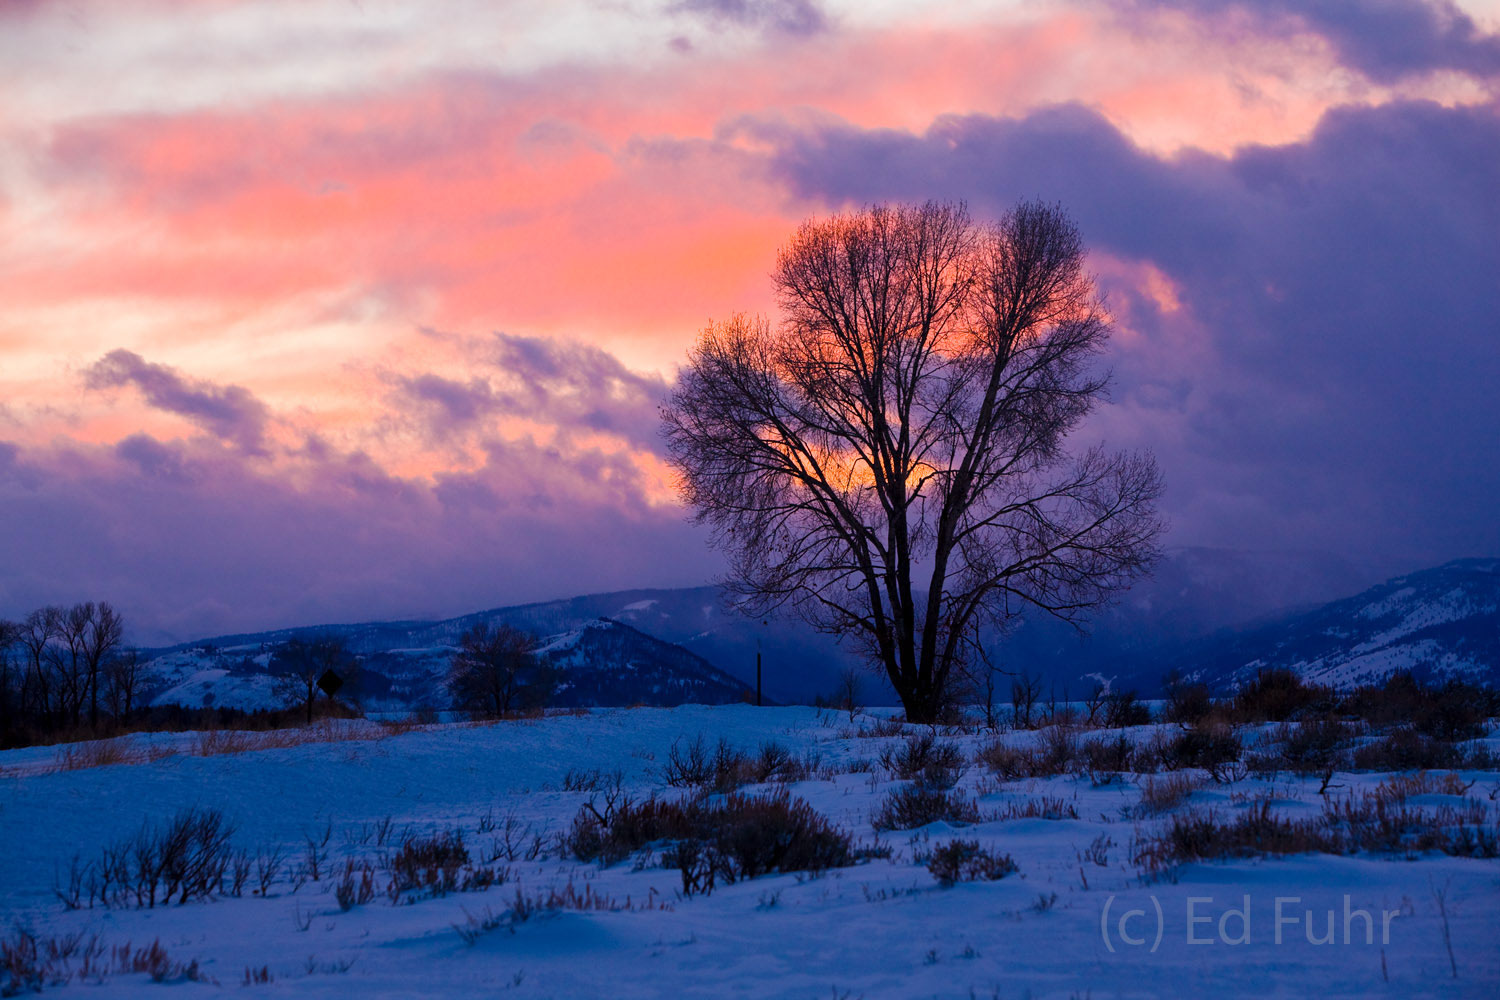 A solitary tree stands against a colorful winter sunset.